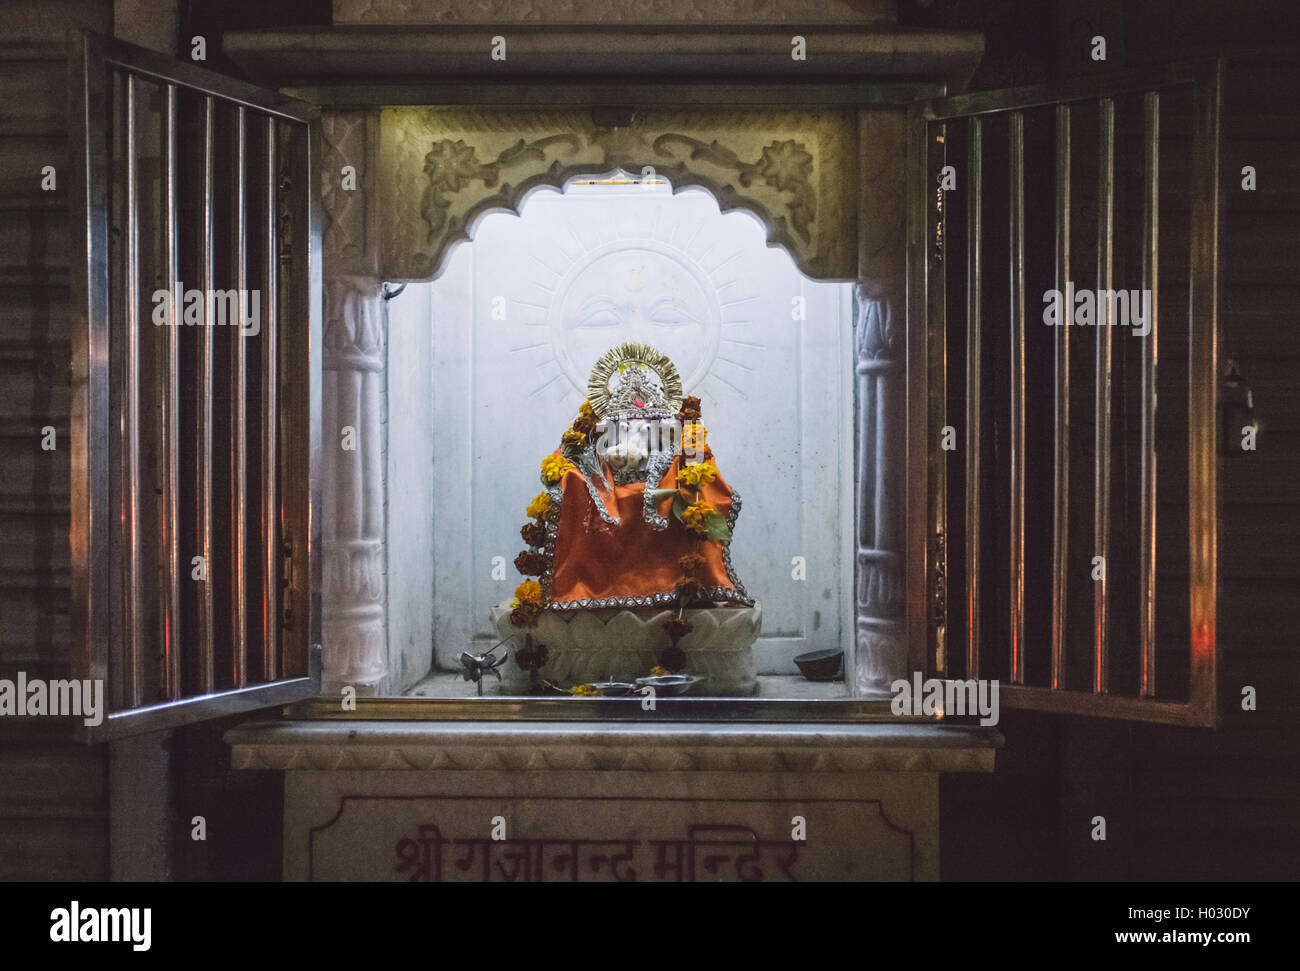 Small Ganesh sculpture in mini street temple decorated with flowers. Stock Photo